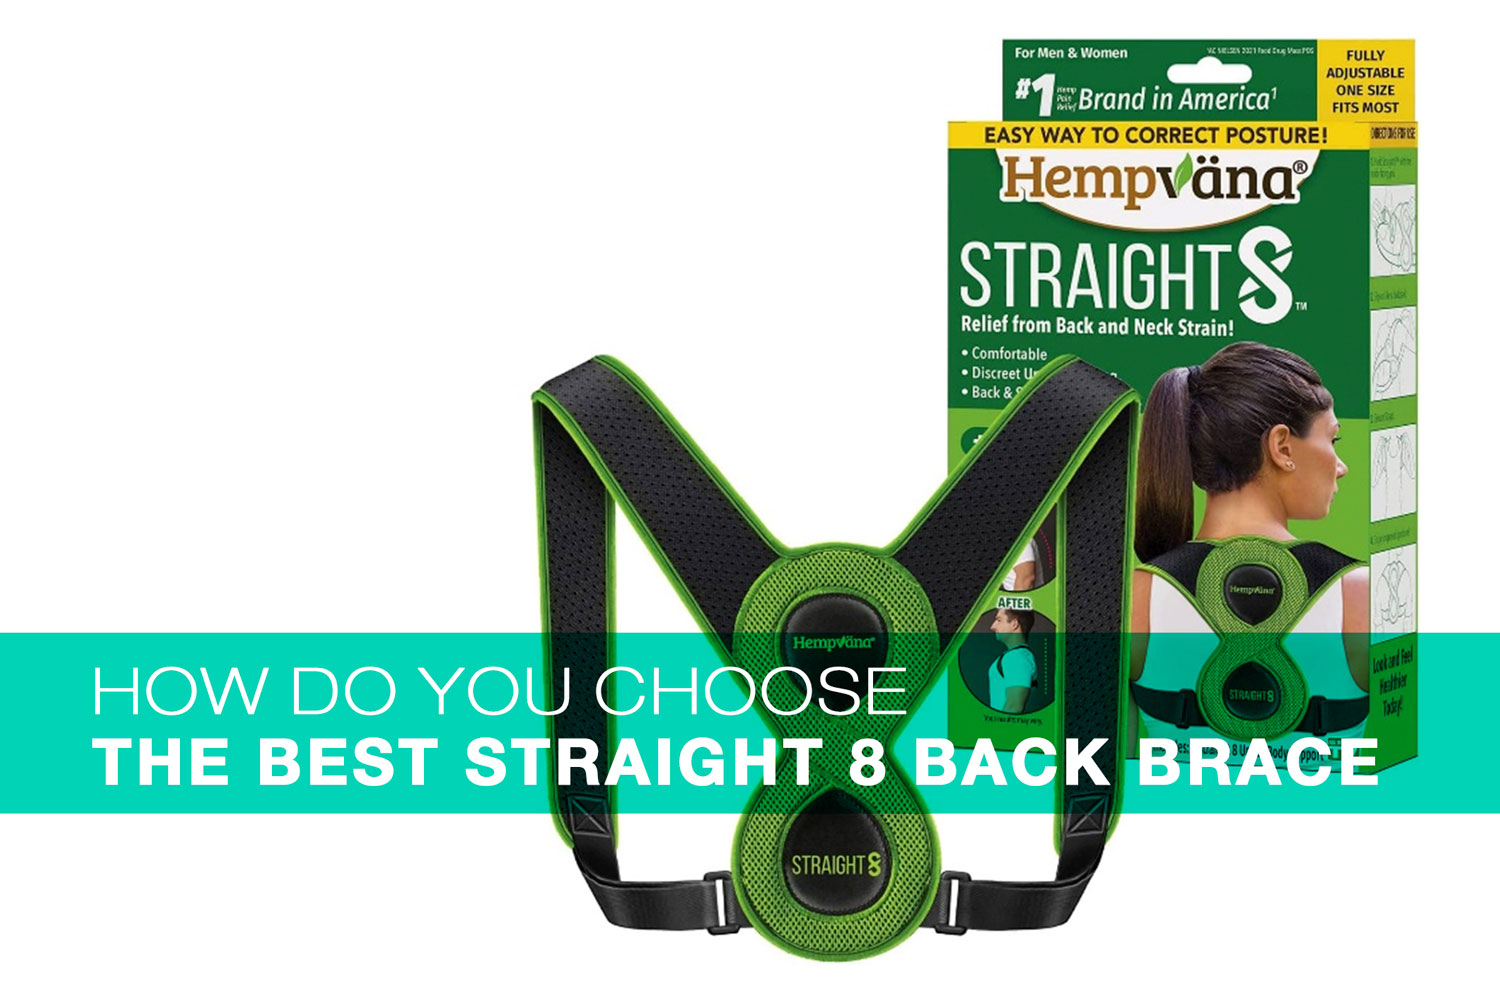 How-Do-You-Choose-The-Best-Straight-8-Back-Brace